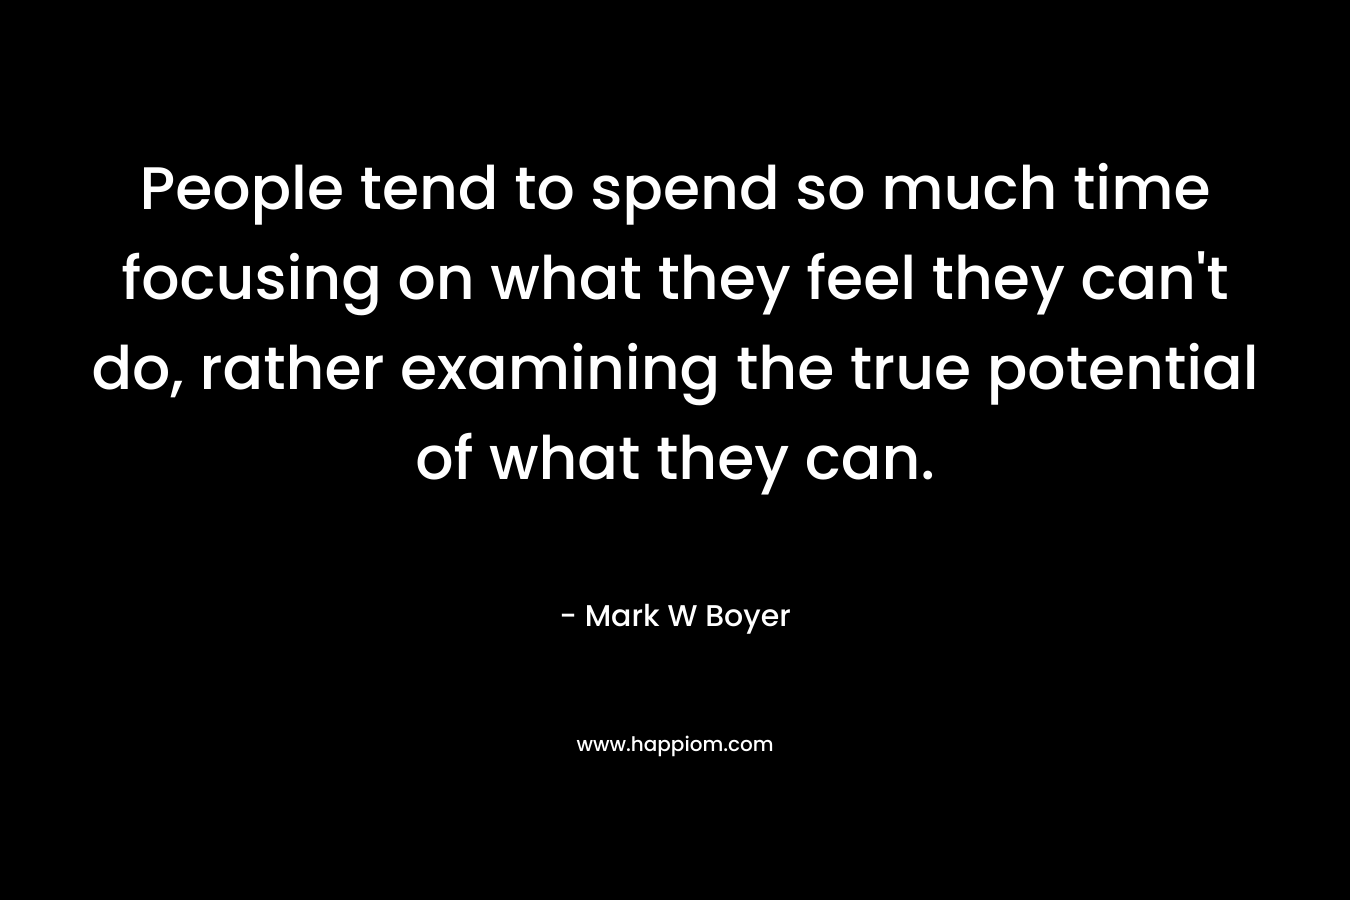 People tend to spend so much time focusing on what they feel they can’t do, rather examining the true potential of what they can. – Mark W Boyer